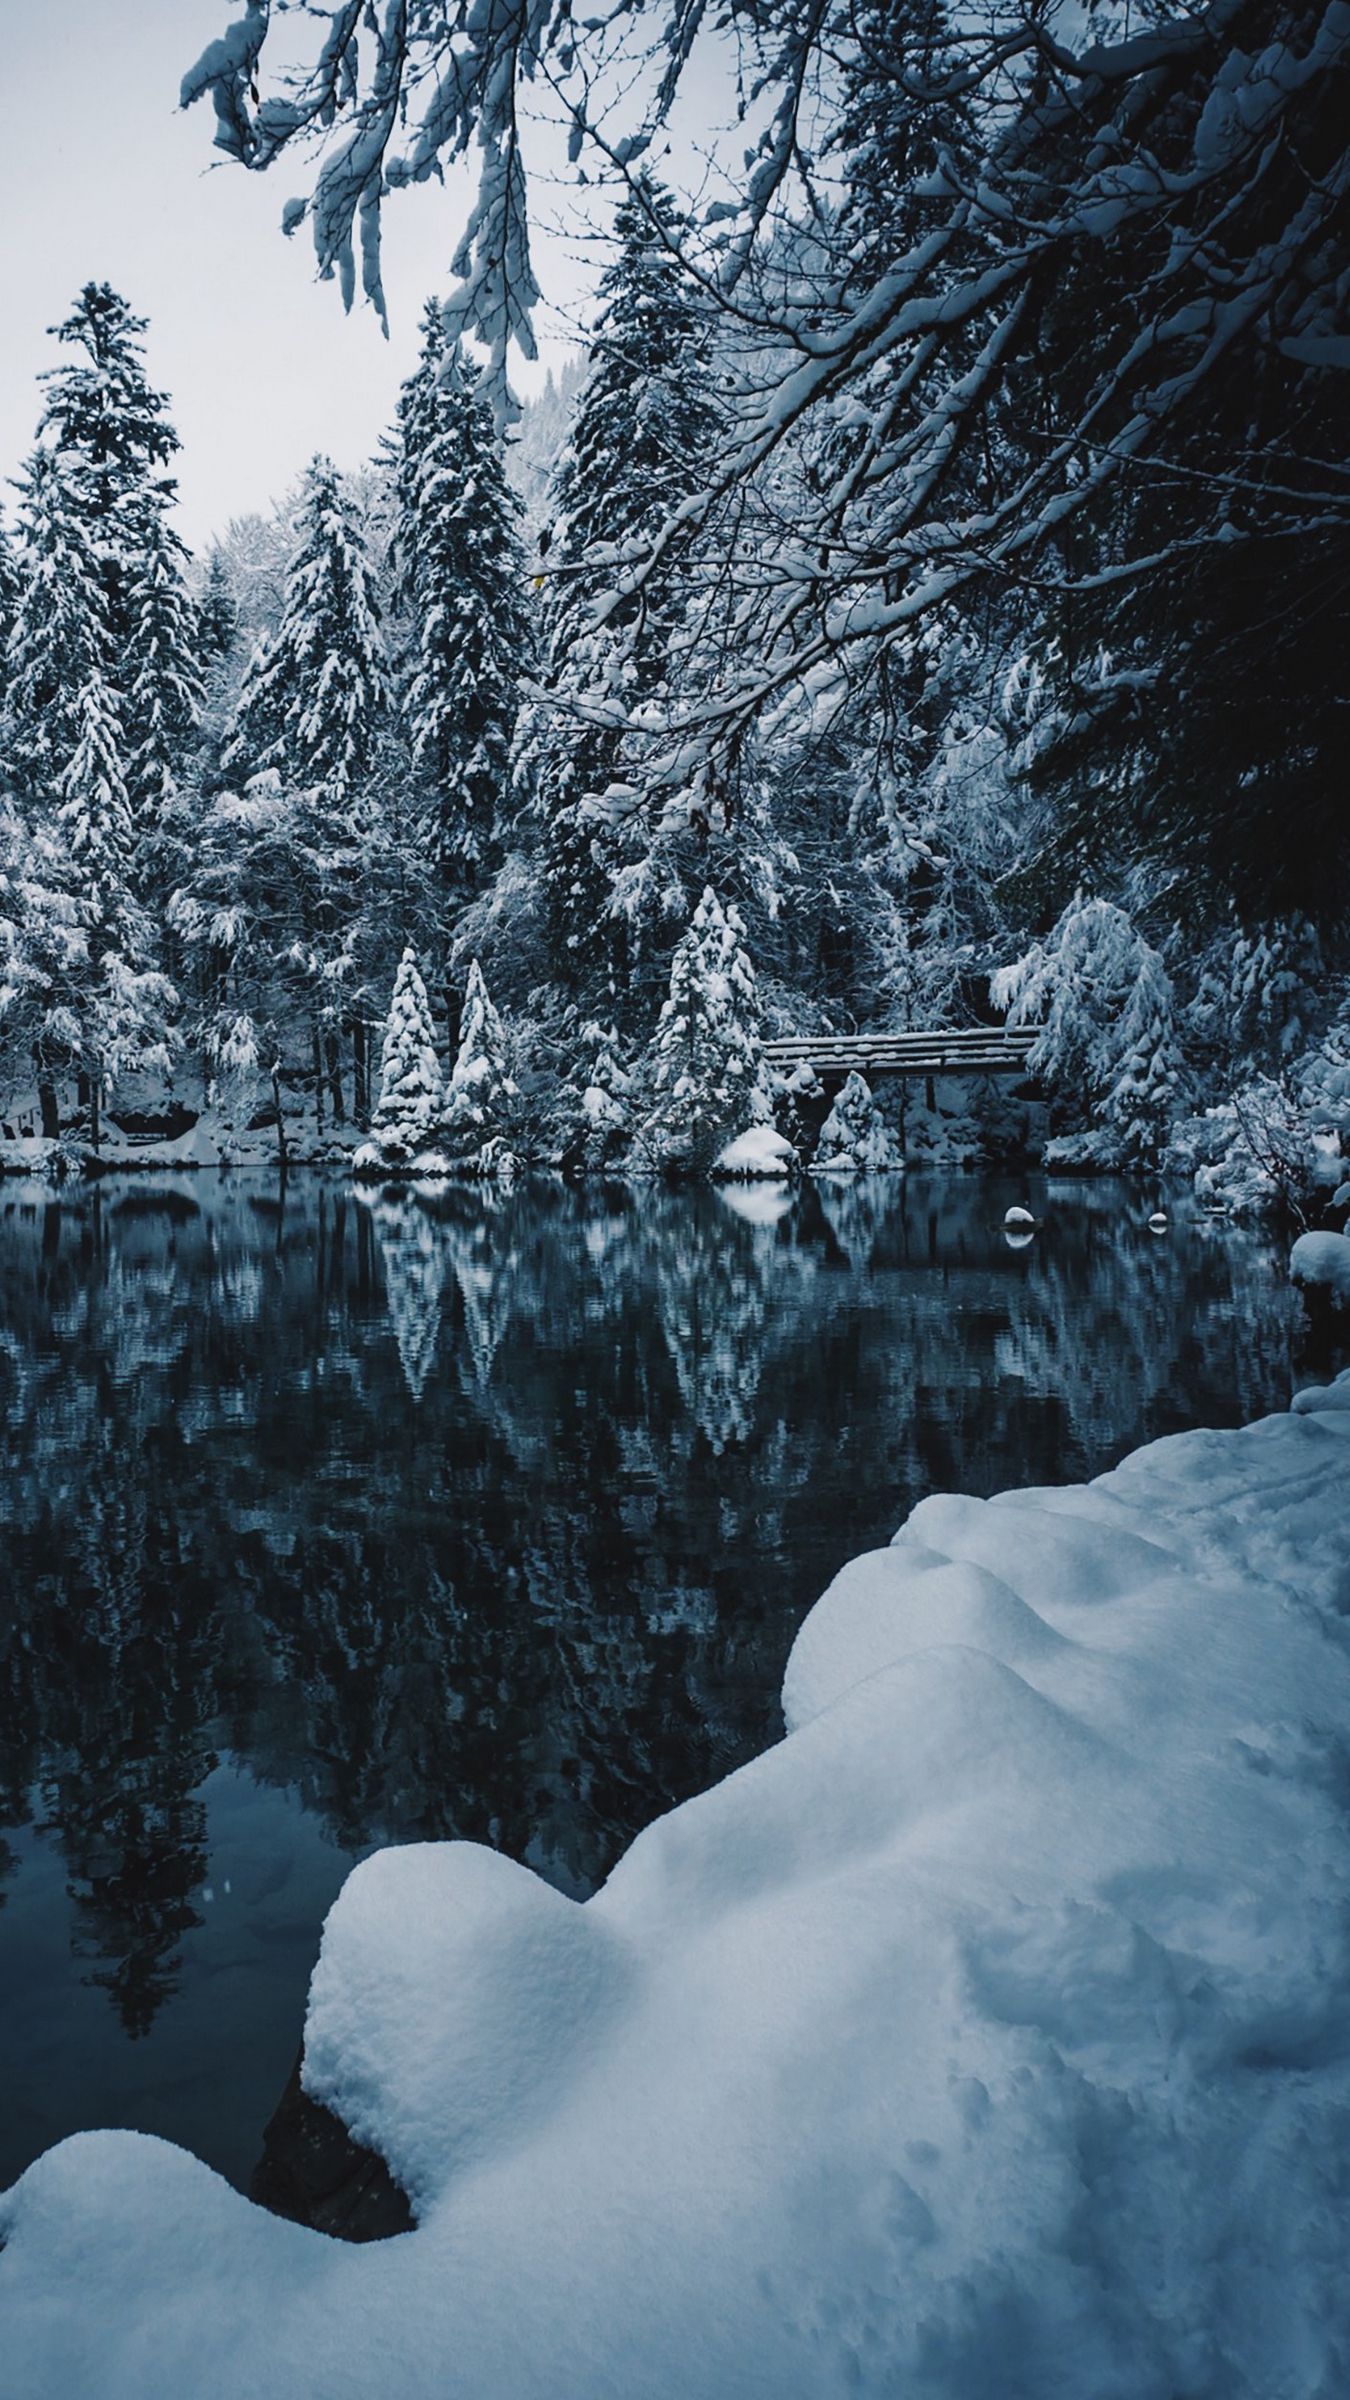 Download wallpaper 1350x2400 lake, snow, branches, winter, snowy iphone 8+/7+/6s+/for parallax HD background